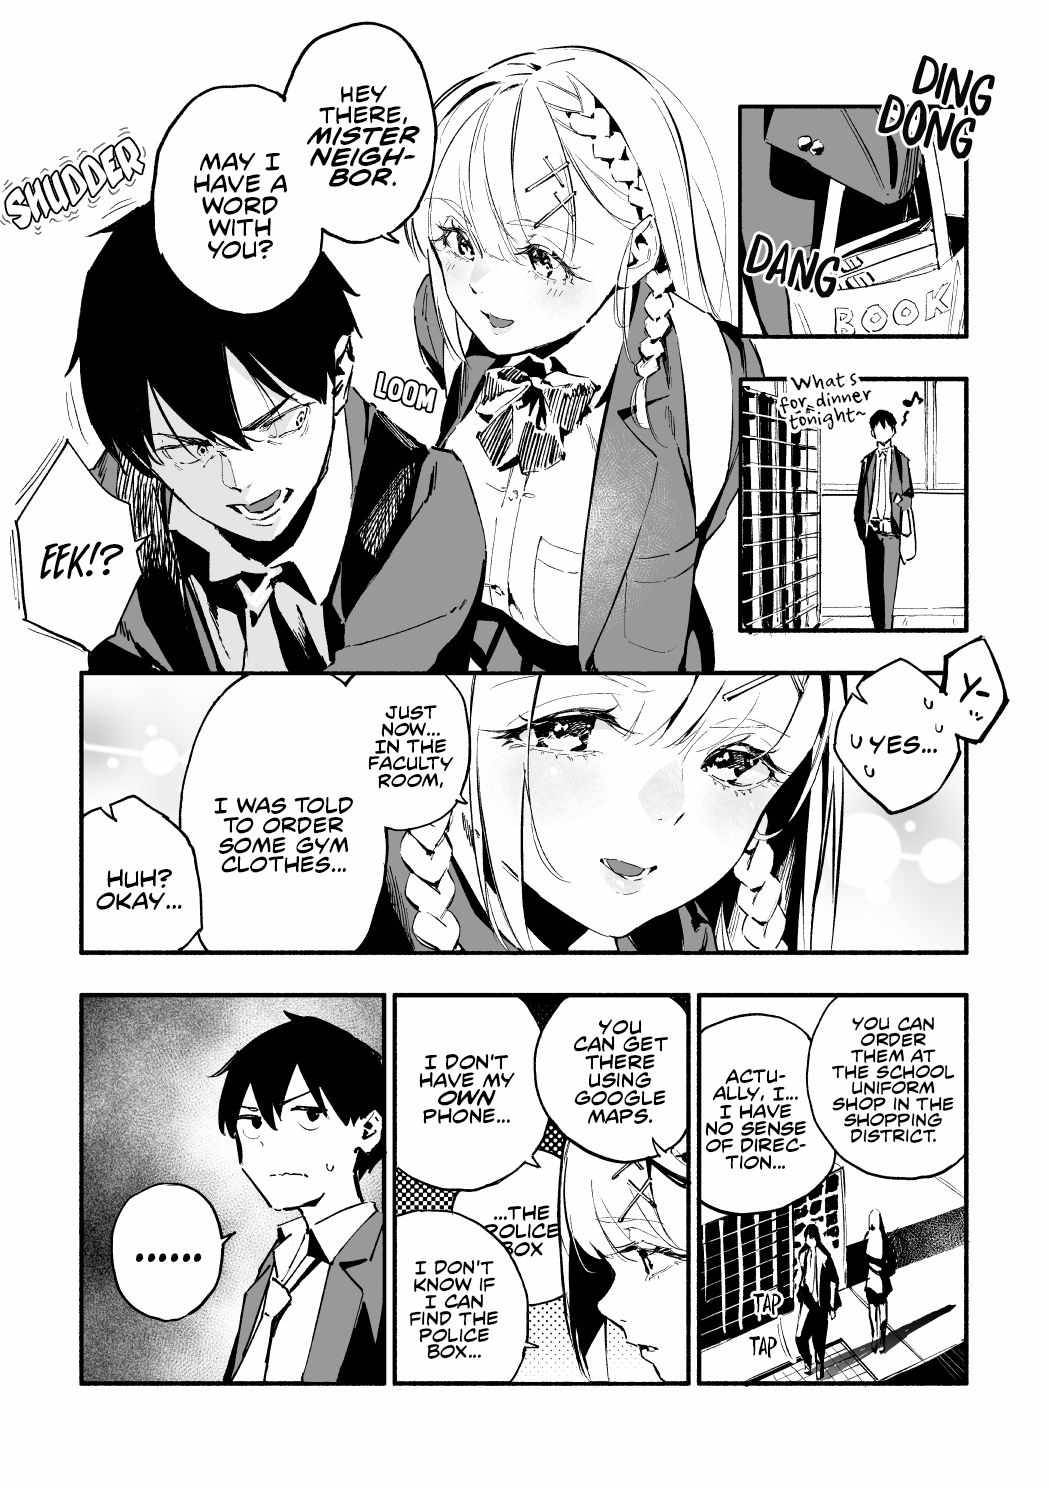 The Angelic Transfer Student and Mastophobia-kun - chapter 3 - #2